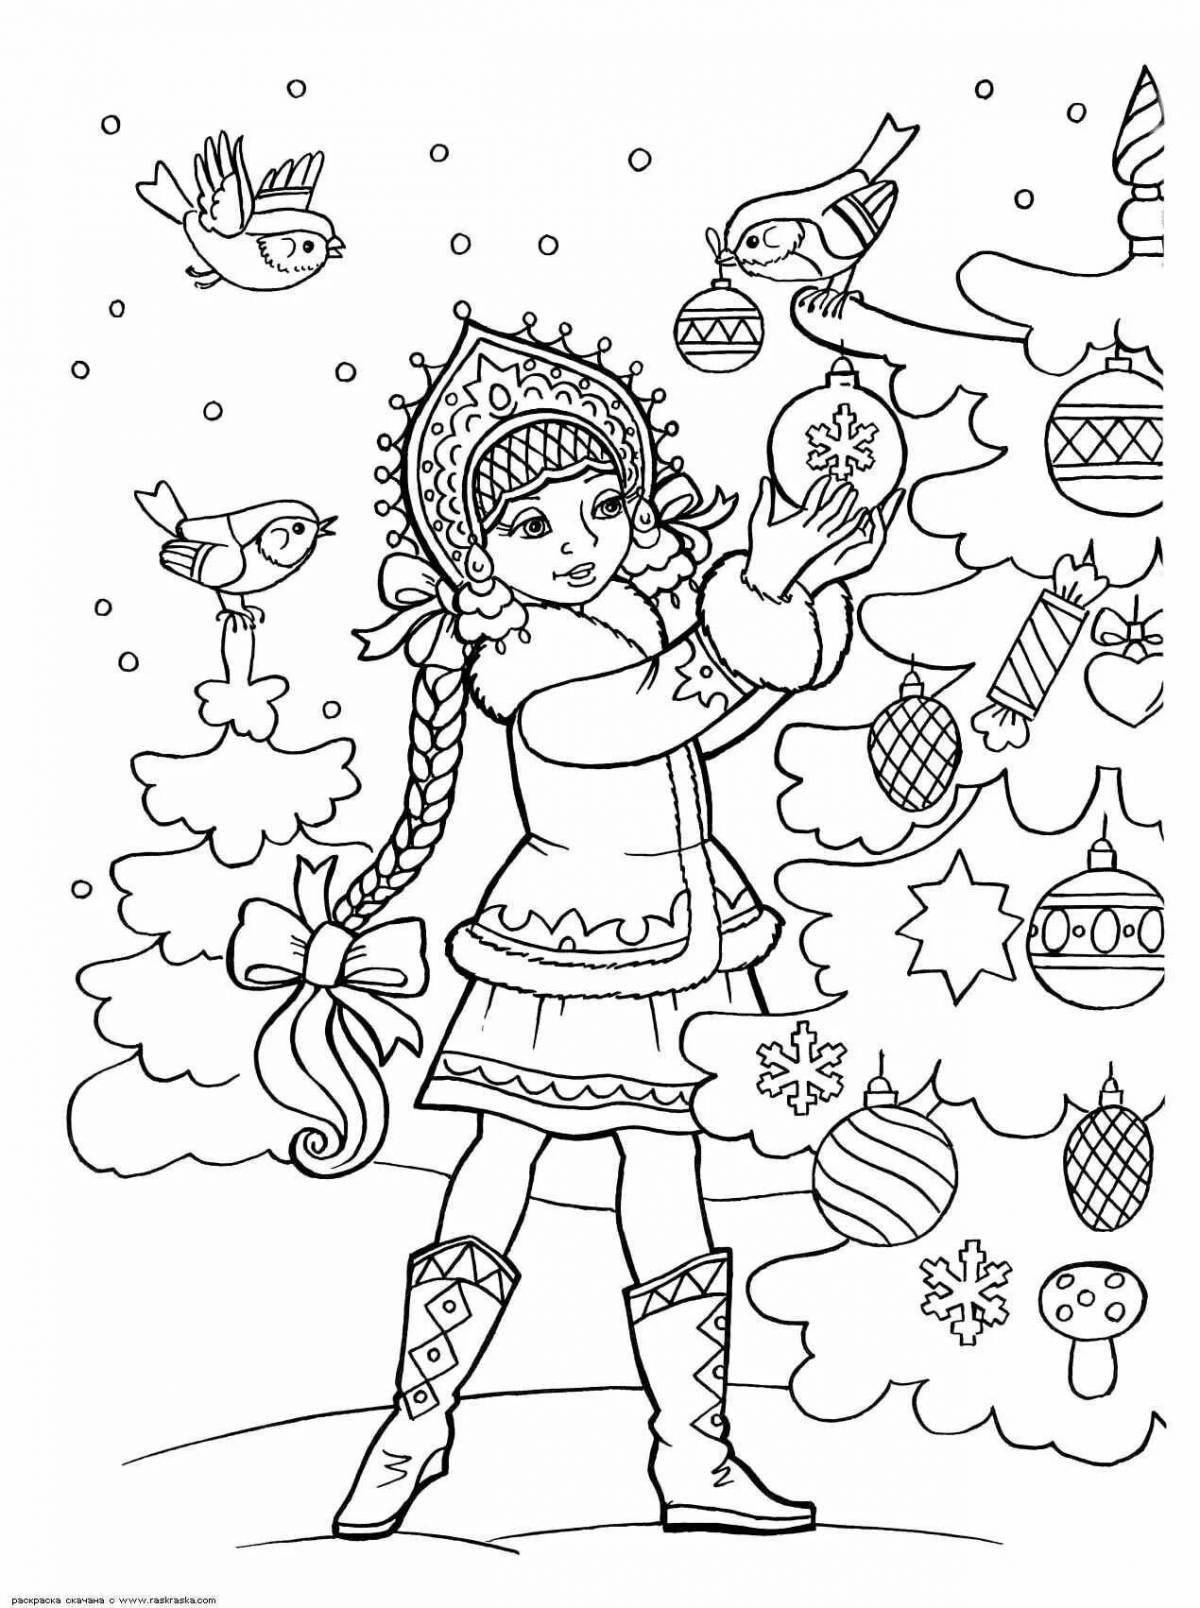 Charming coloring beautiful for the new year